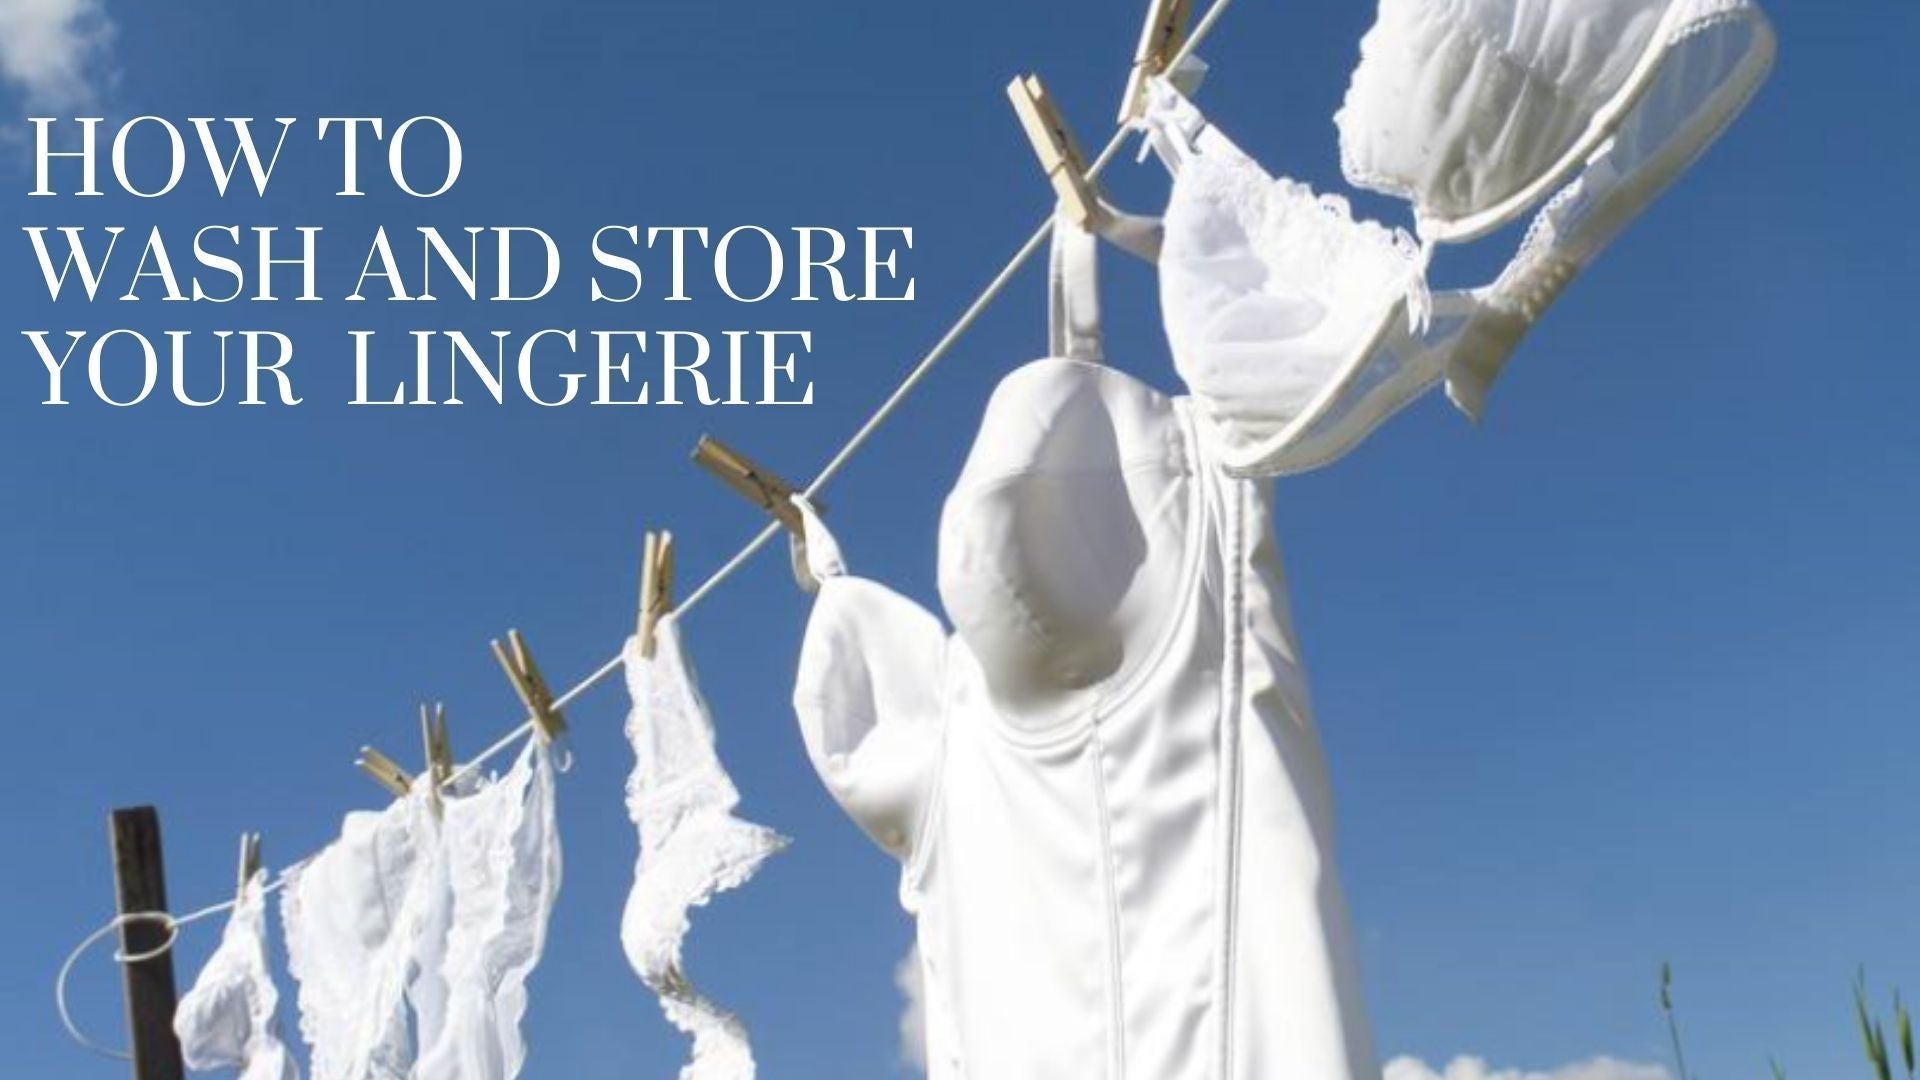 How to Wash and Store Your Lingerie